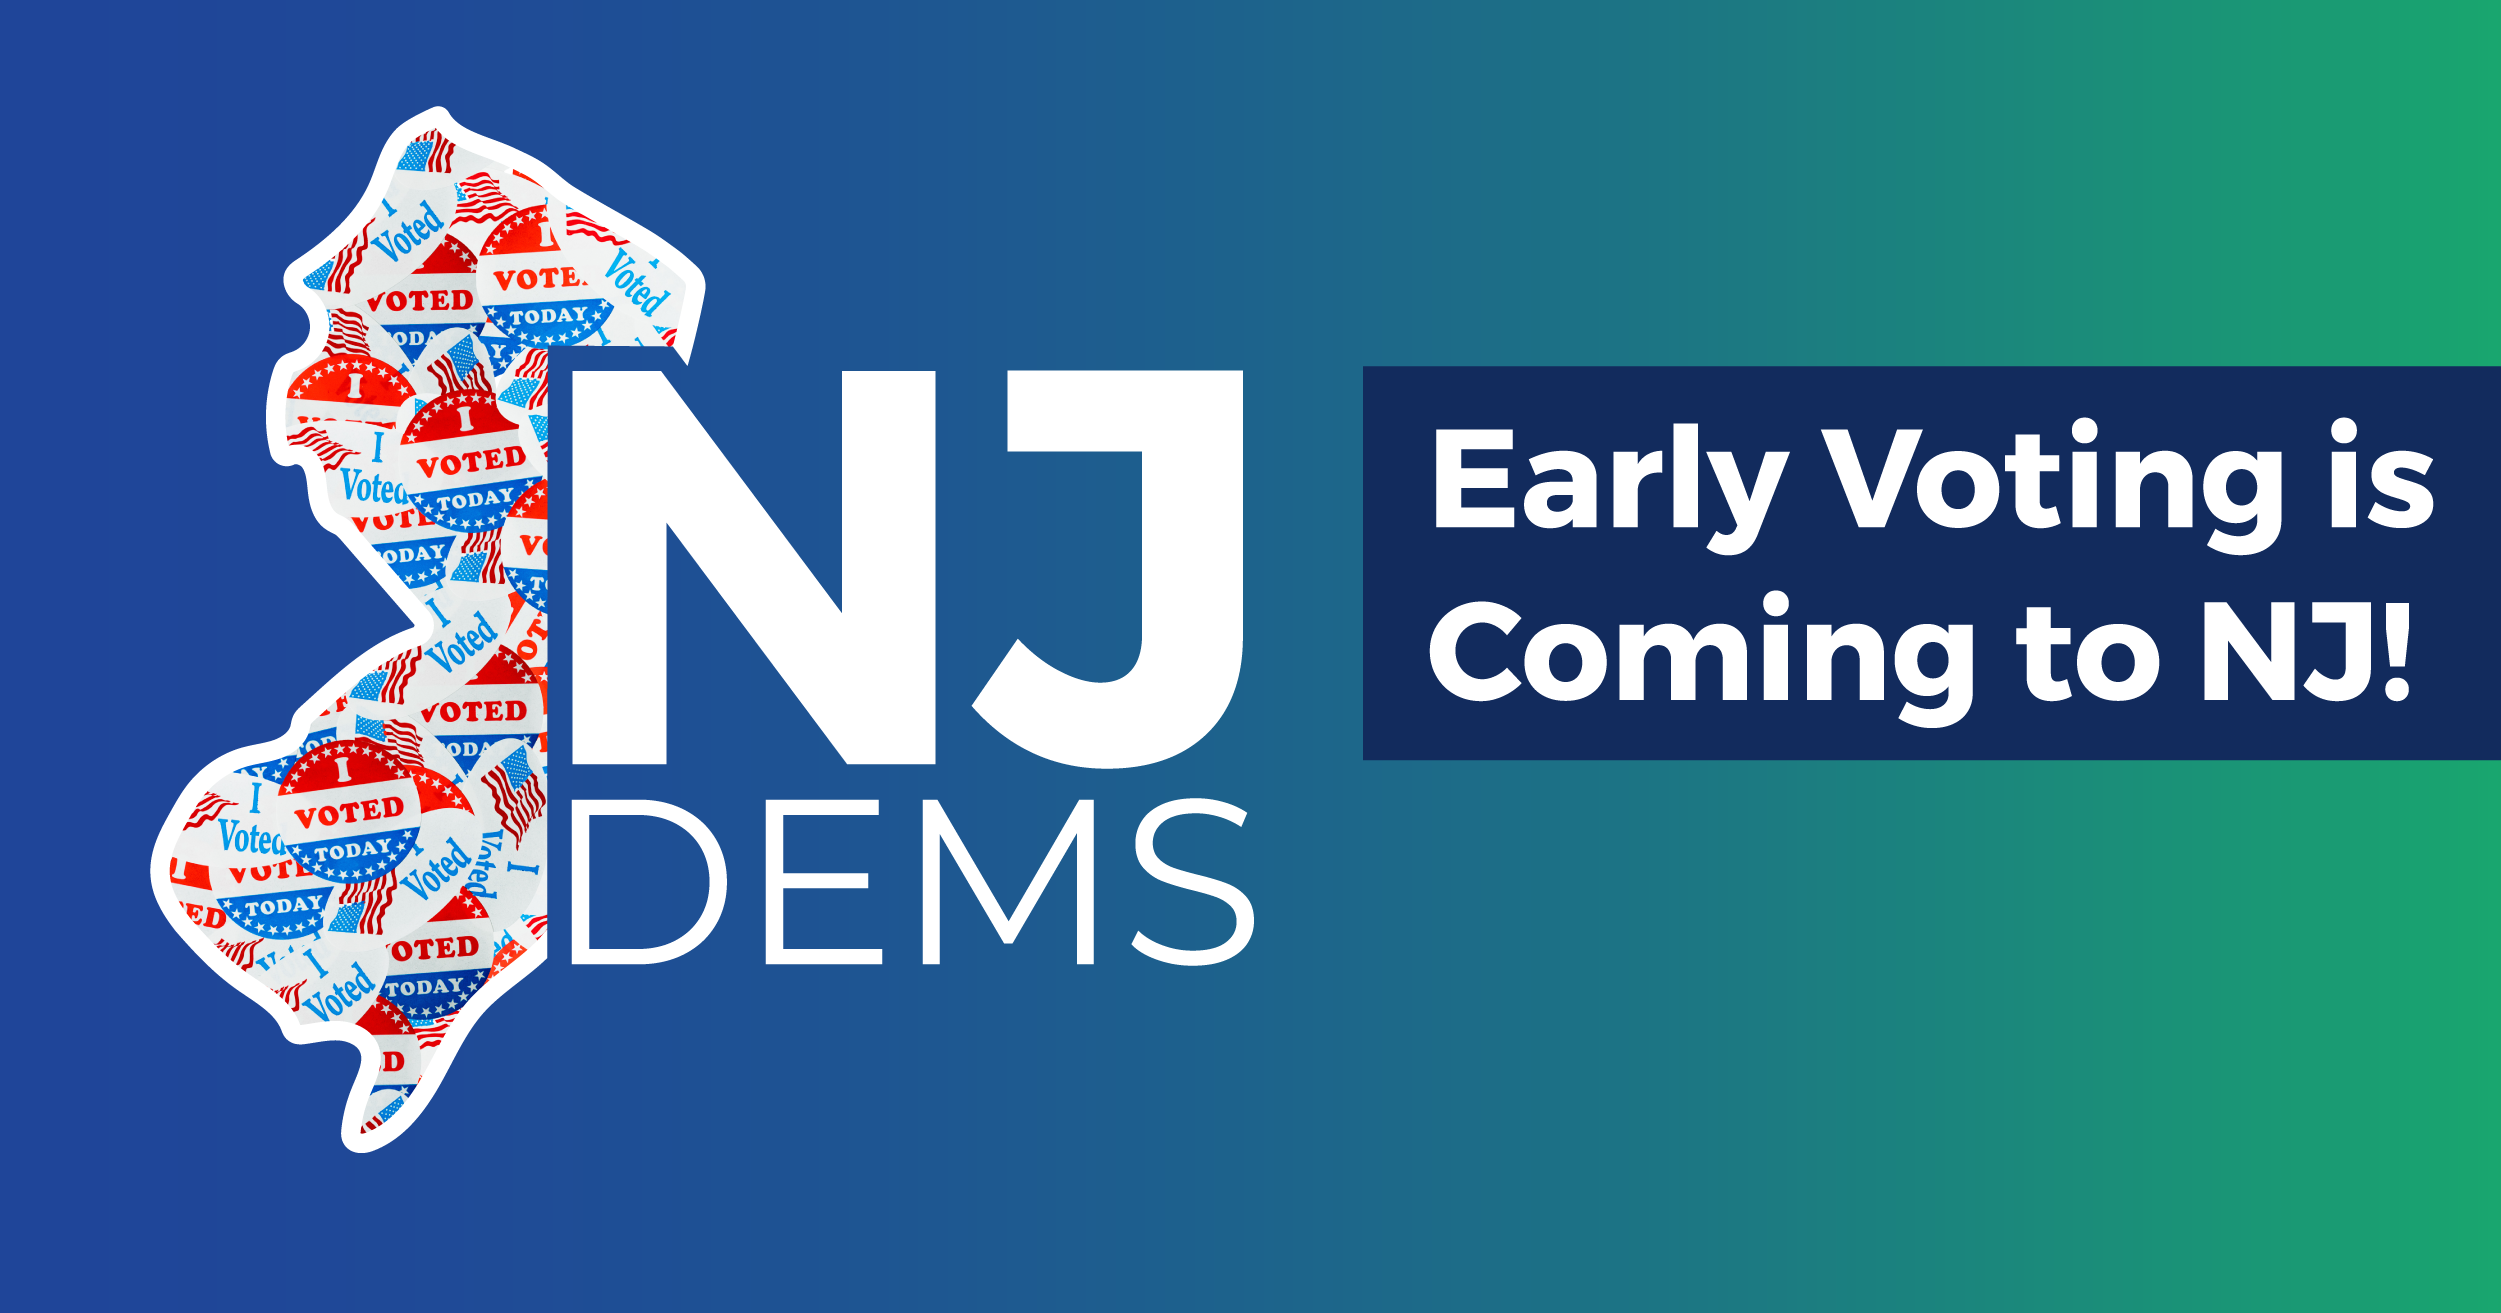 Early Voting is Coming to NJ! Here’s What it Means for Our Elections